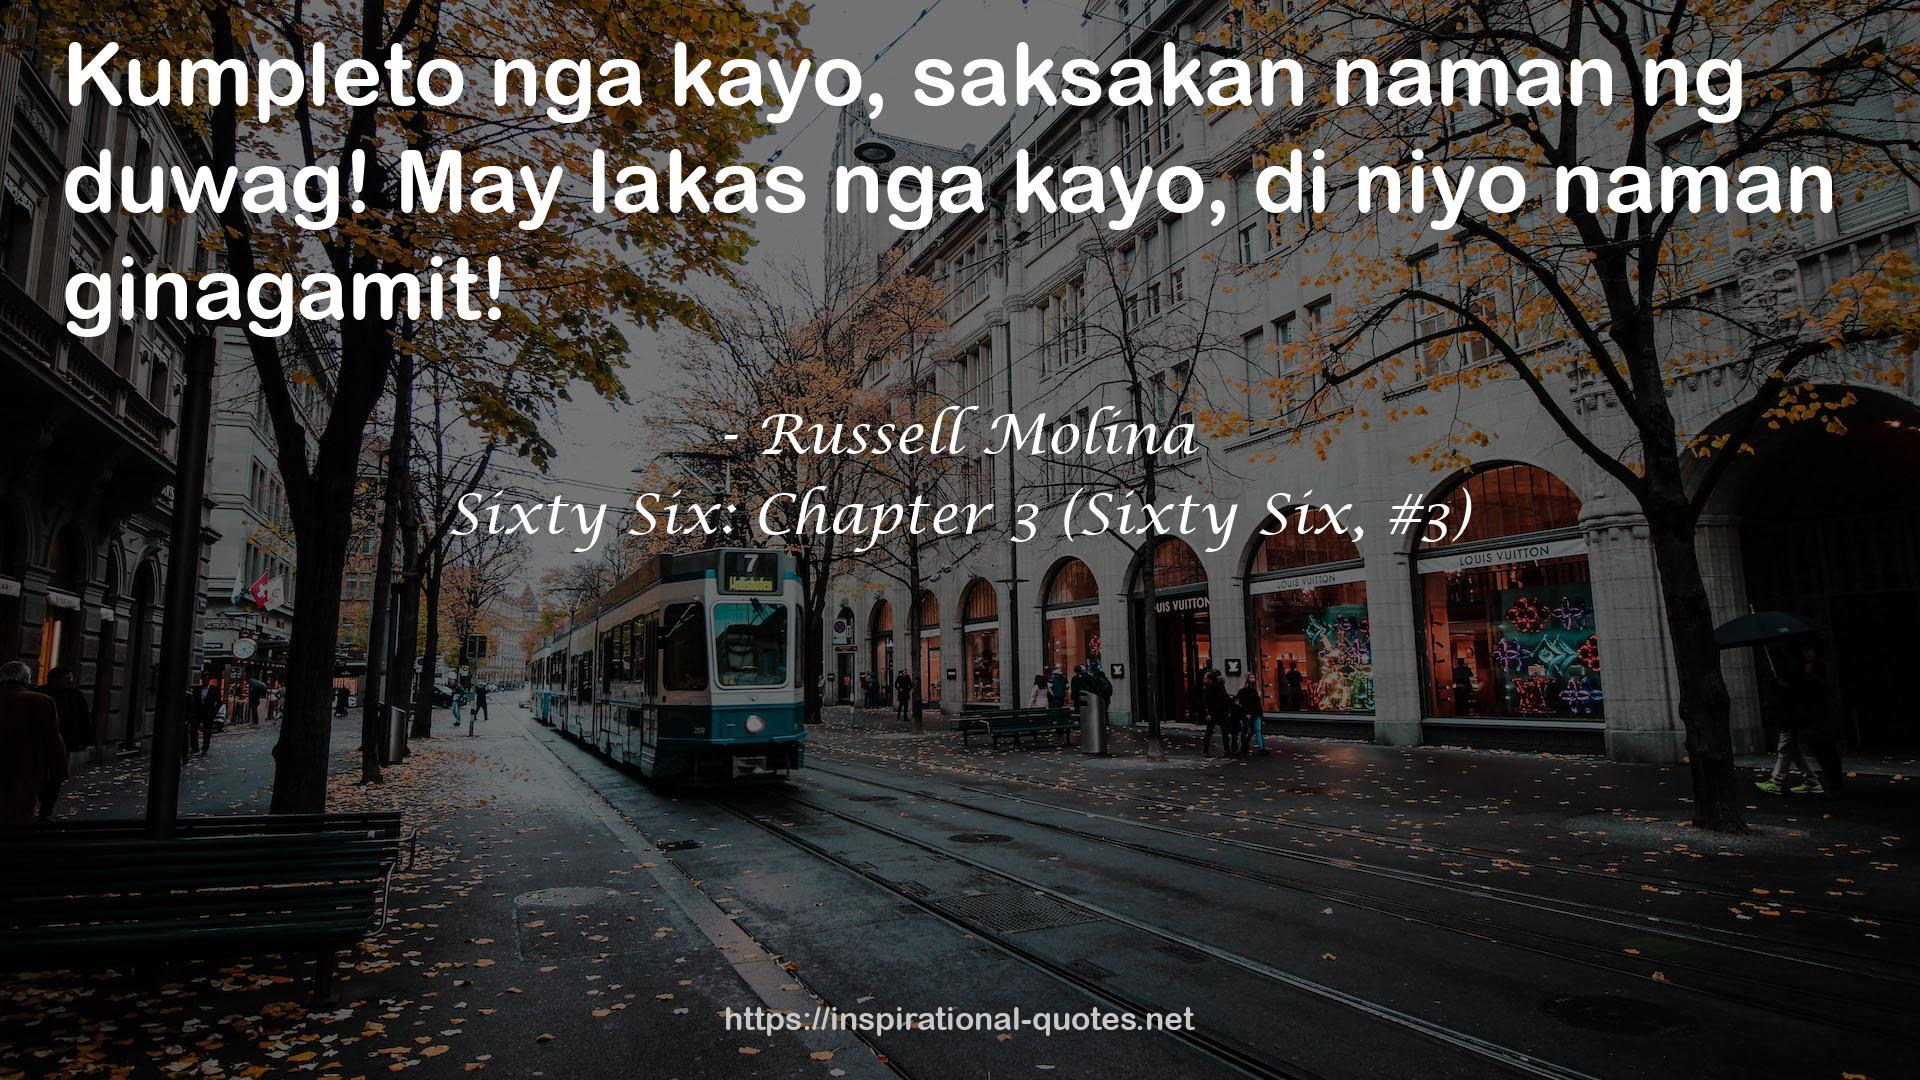 Russell Molina QUOTES